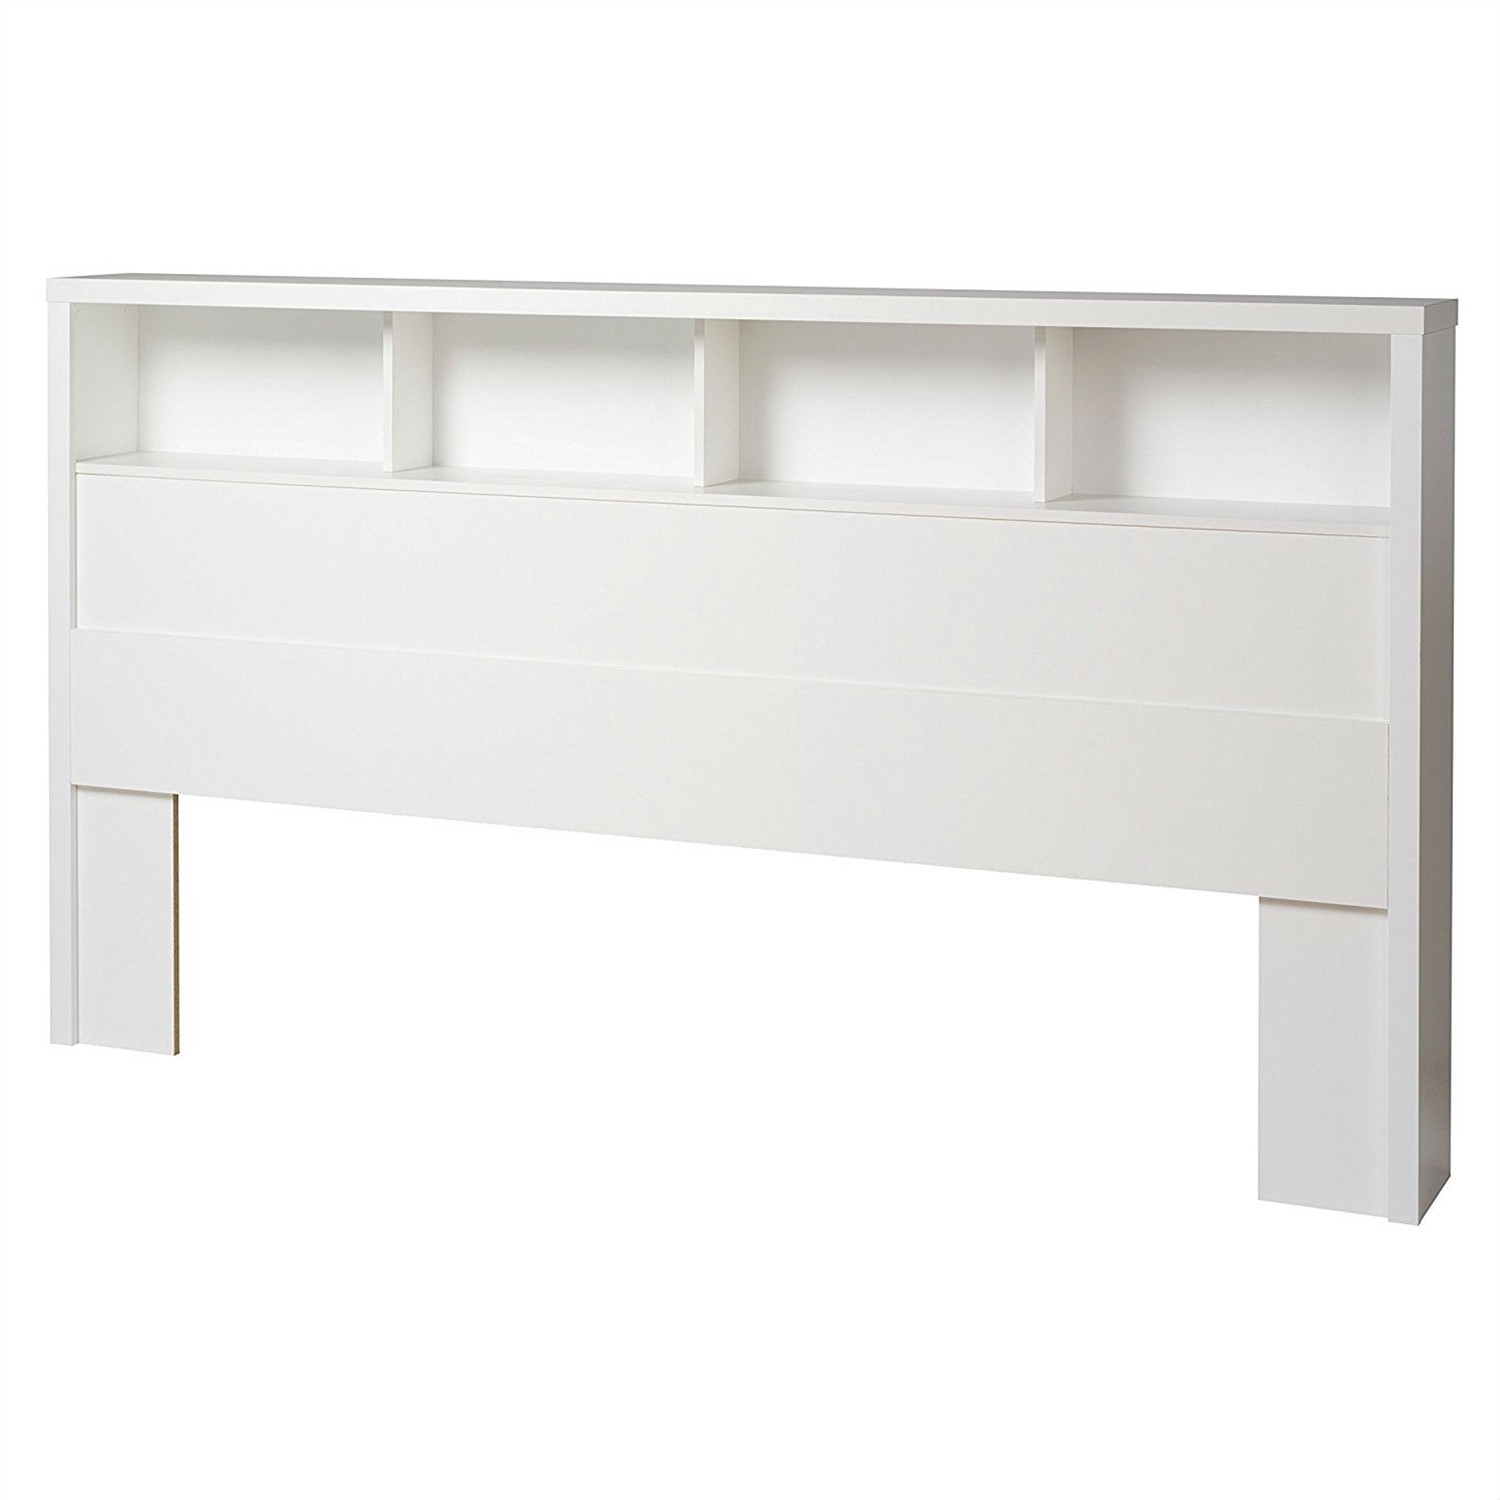 King size Bookcase Headboard with Storage Shelves in White